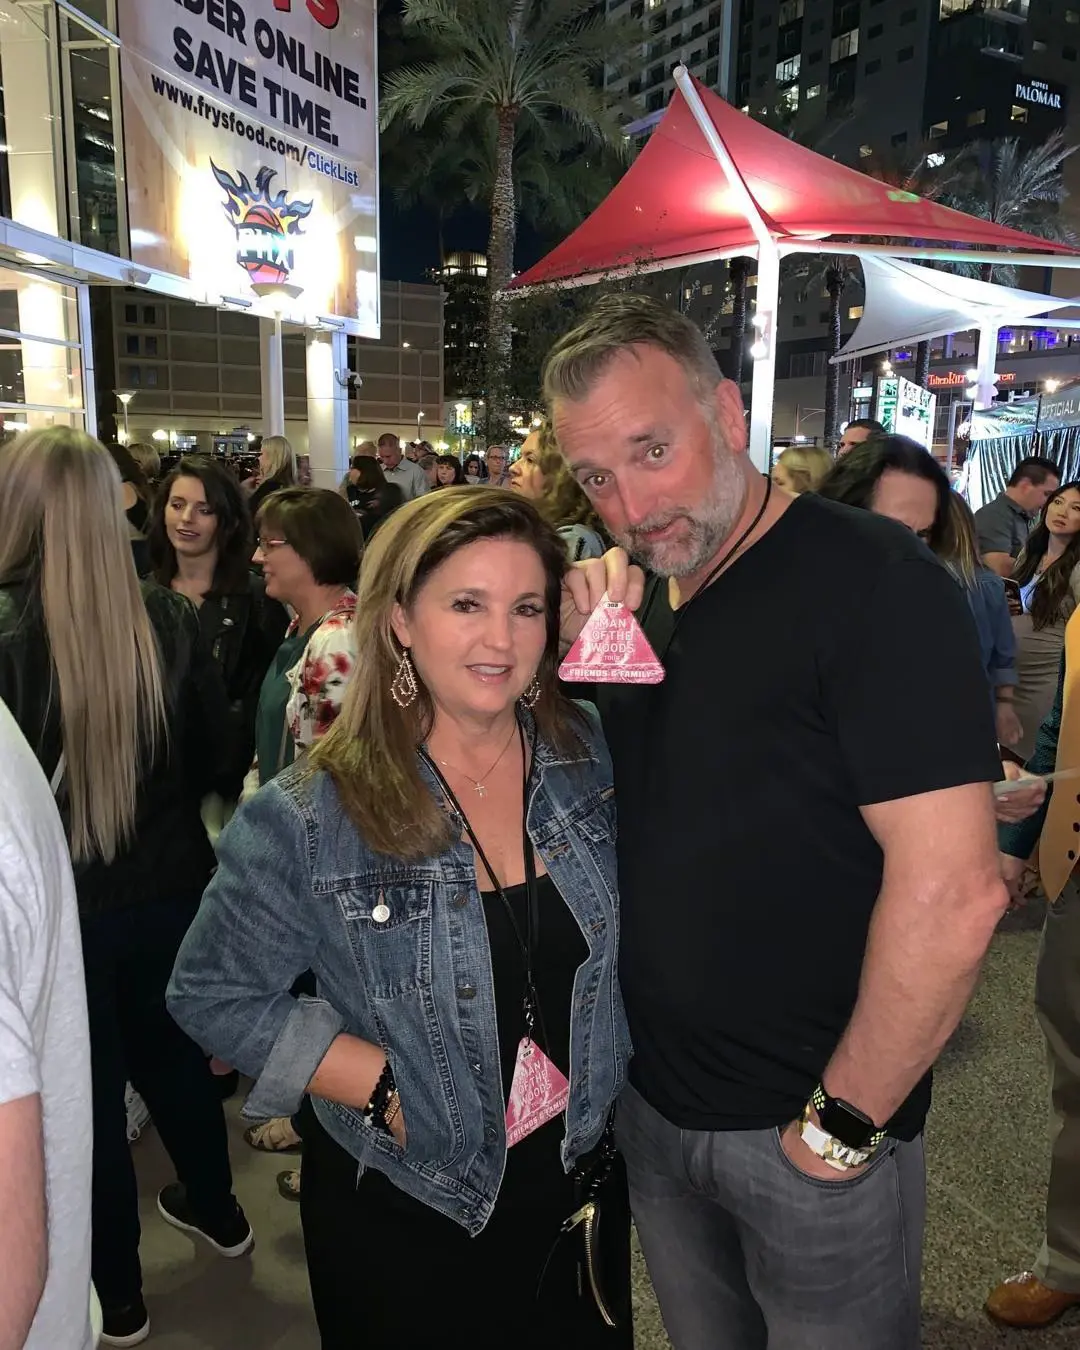 Mike and Tina went to see JT in Phoenix in March 2019.